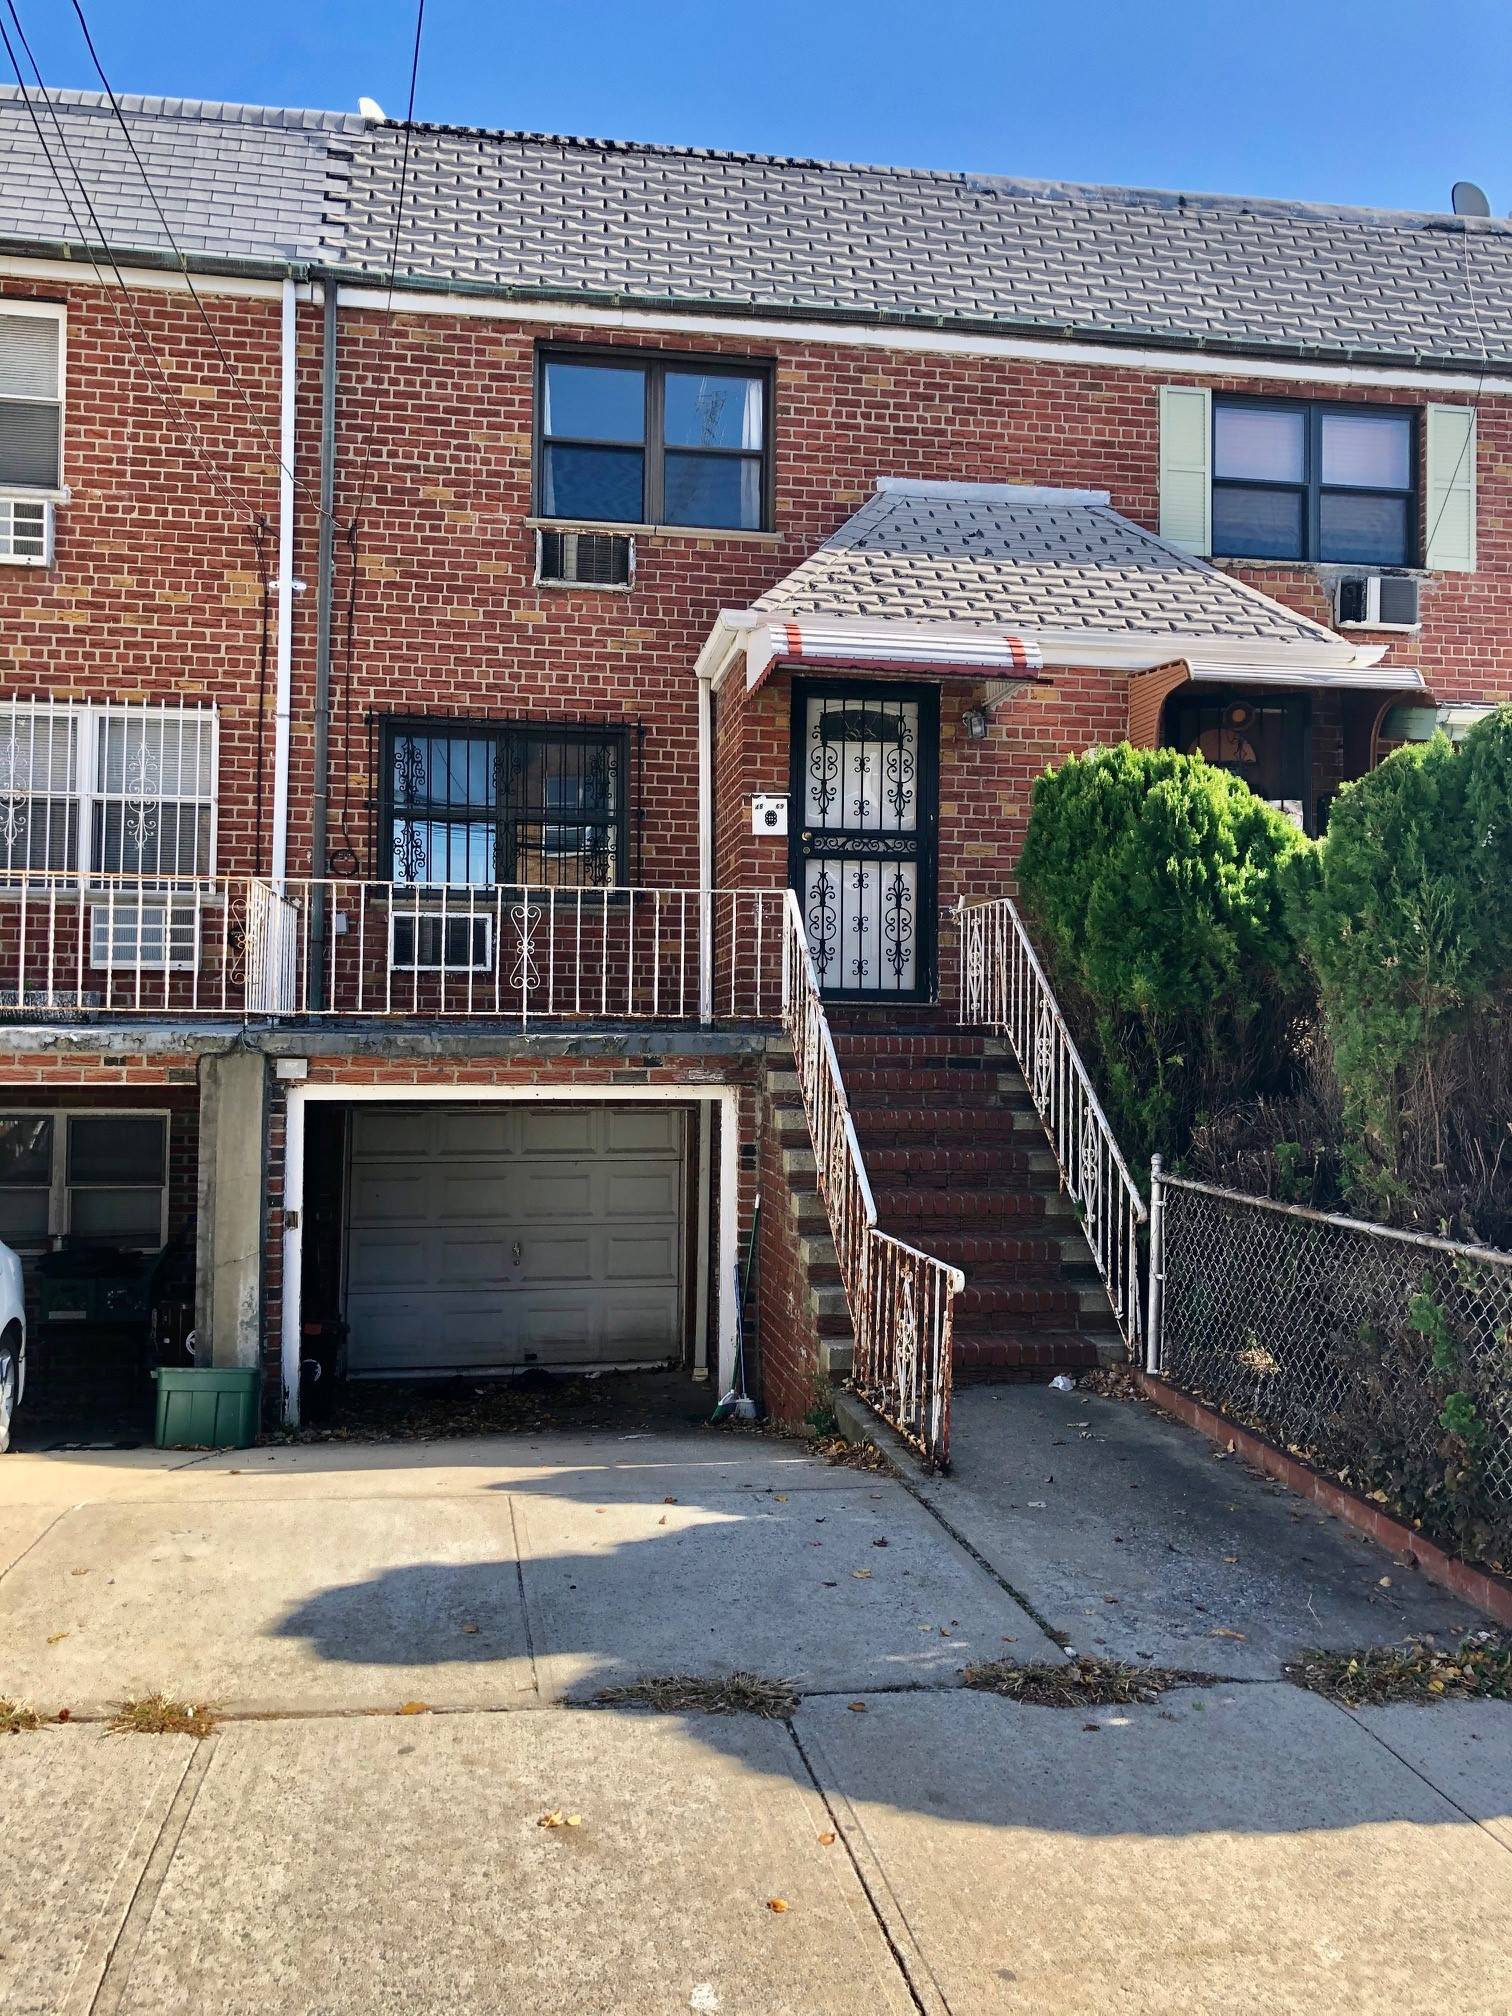 Whole Townhouse For Rent in Prime LIC / Sunnyside Location!